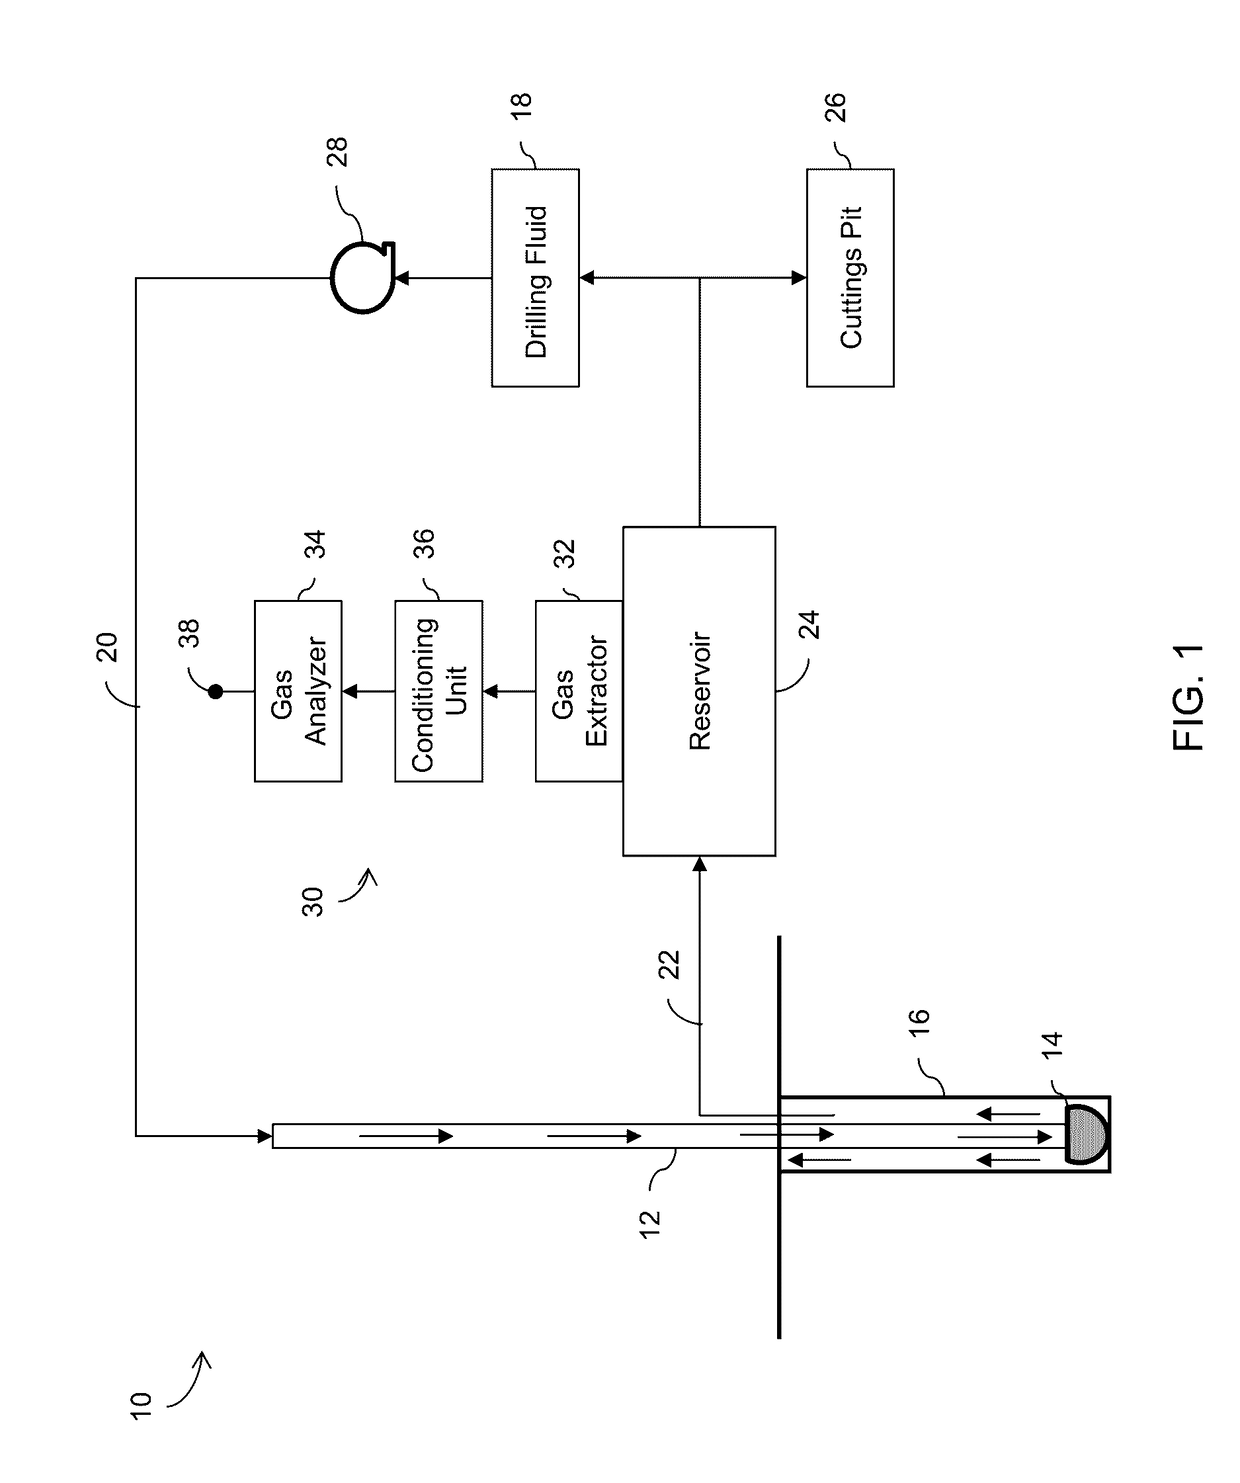 Methods and devices for analyzing gases in well-related fluids using fourier transform infrared (FTIR) spectroscopy